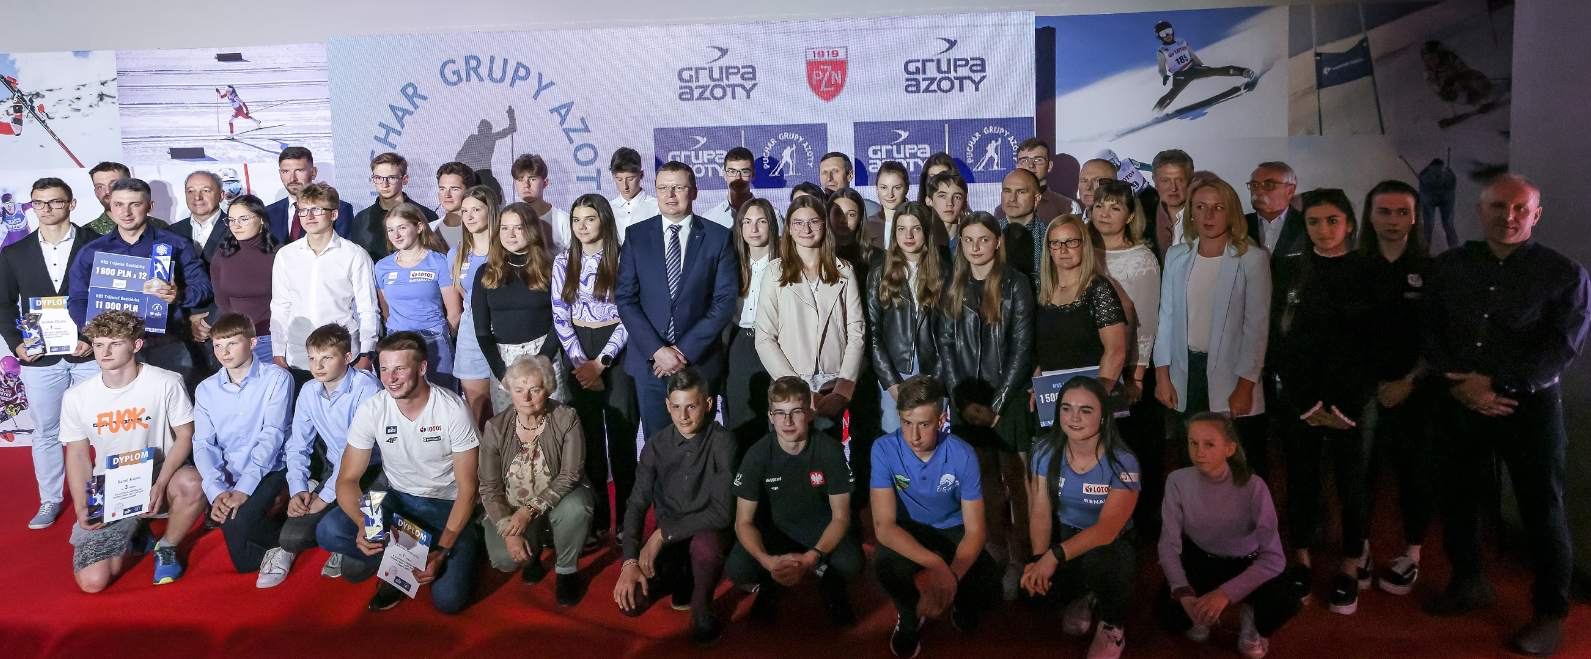 Summary of the 4th edition of the Azoty Group Cup